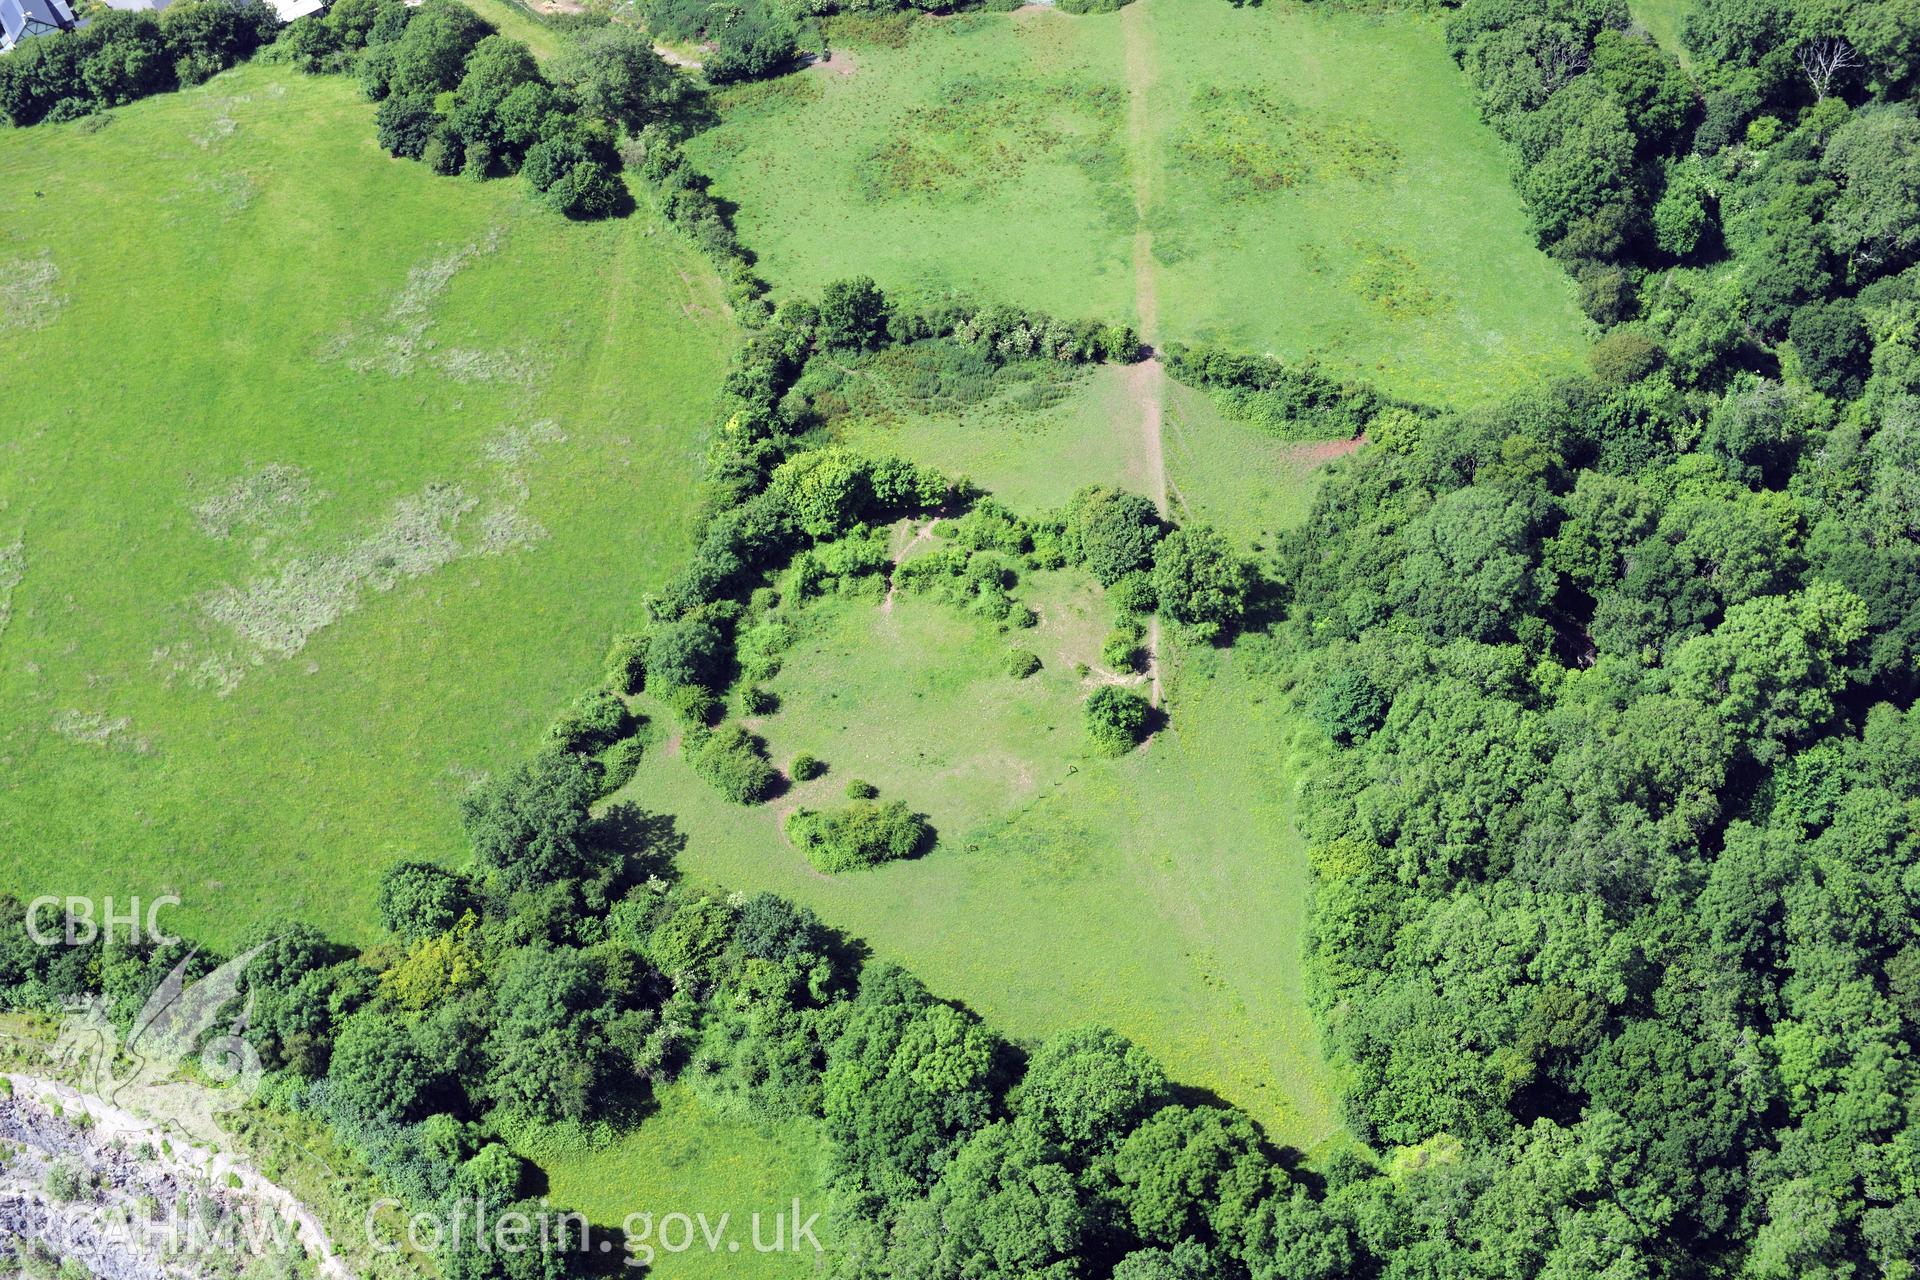 Caerau Castle Ringwork, near Cardiff. Oblique aerial photograph taken during the Royal Commission's programme of archaeological aerial reconnaissance by Toby Driver on 29th June 2015.